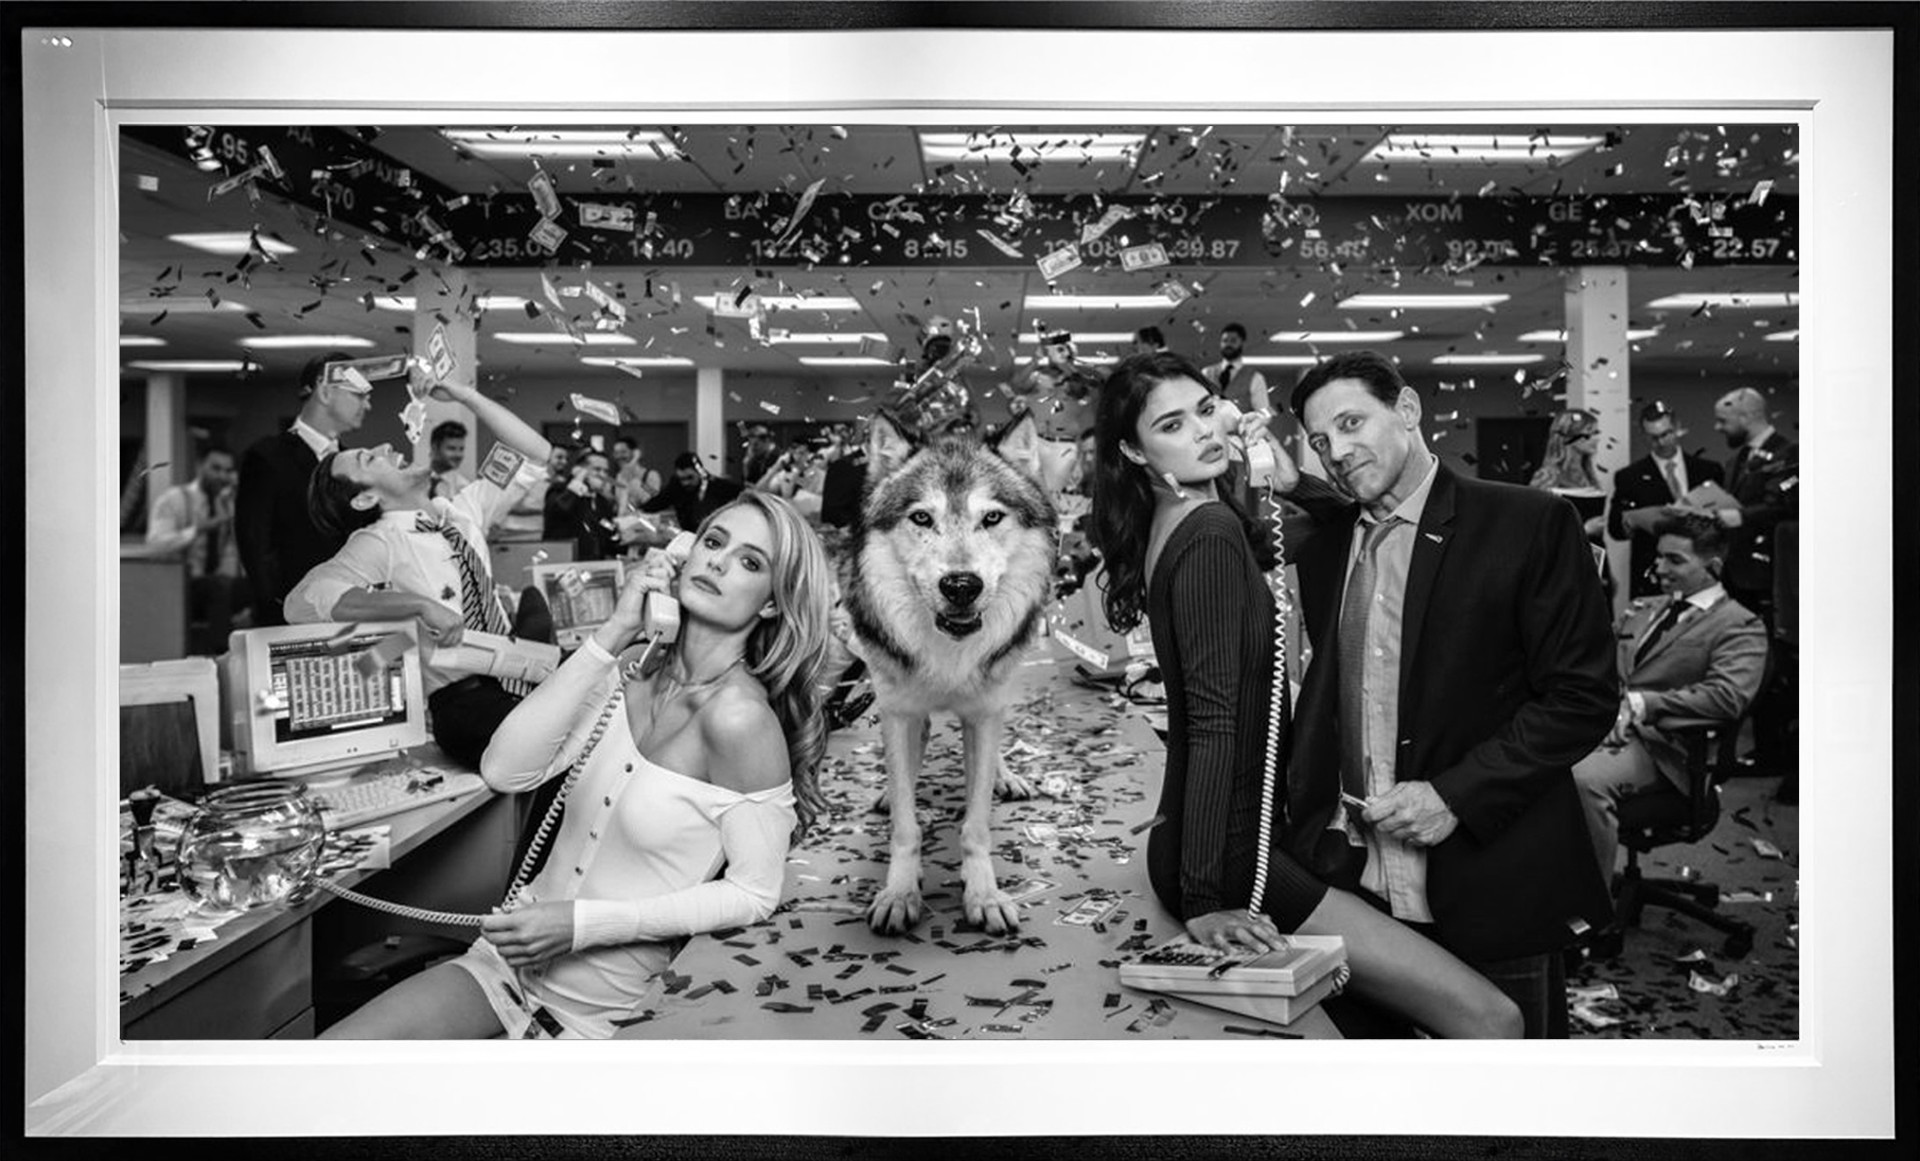 The Wolves of Wall Street II by David Yarrow